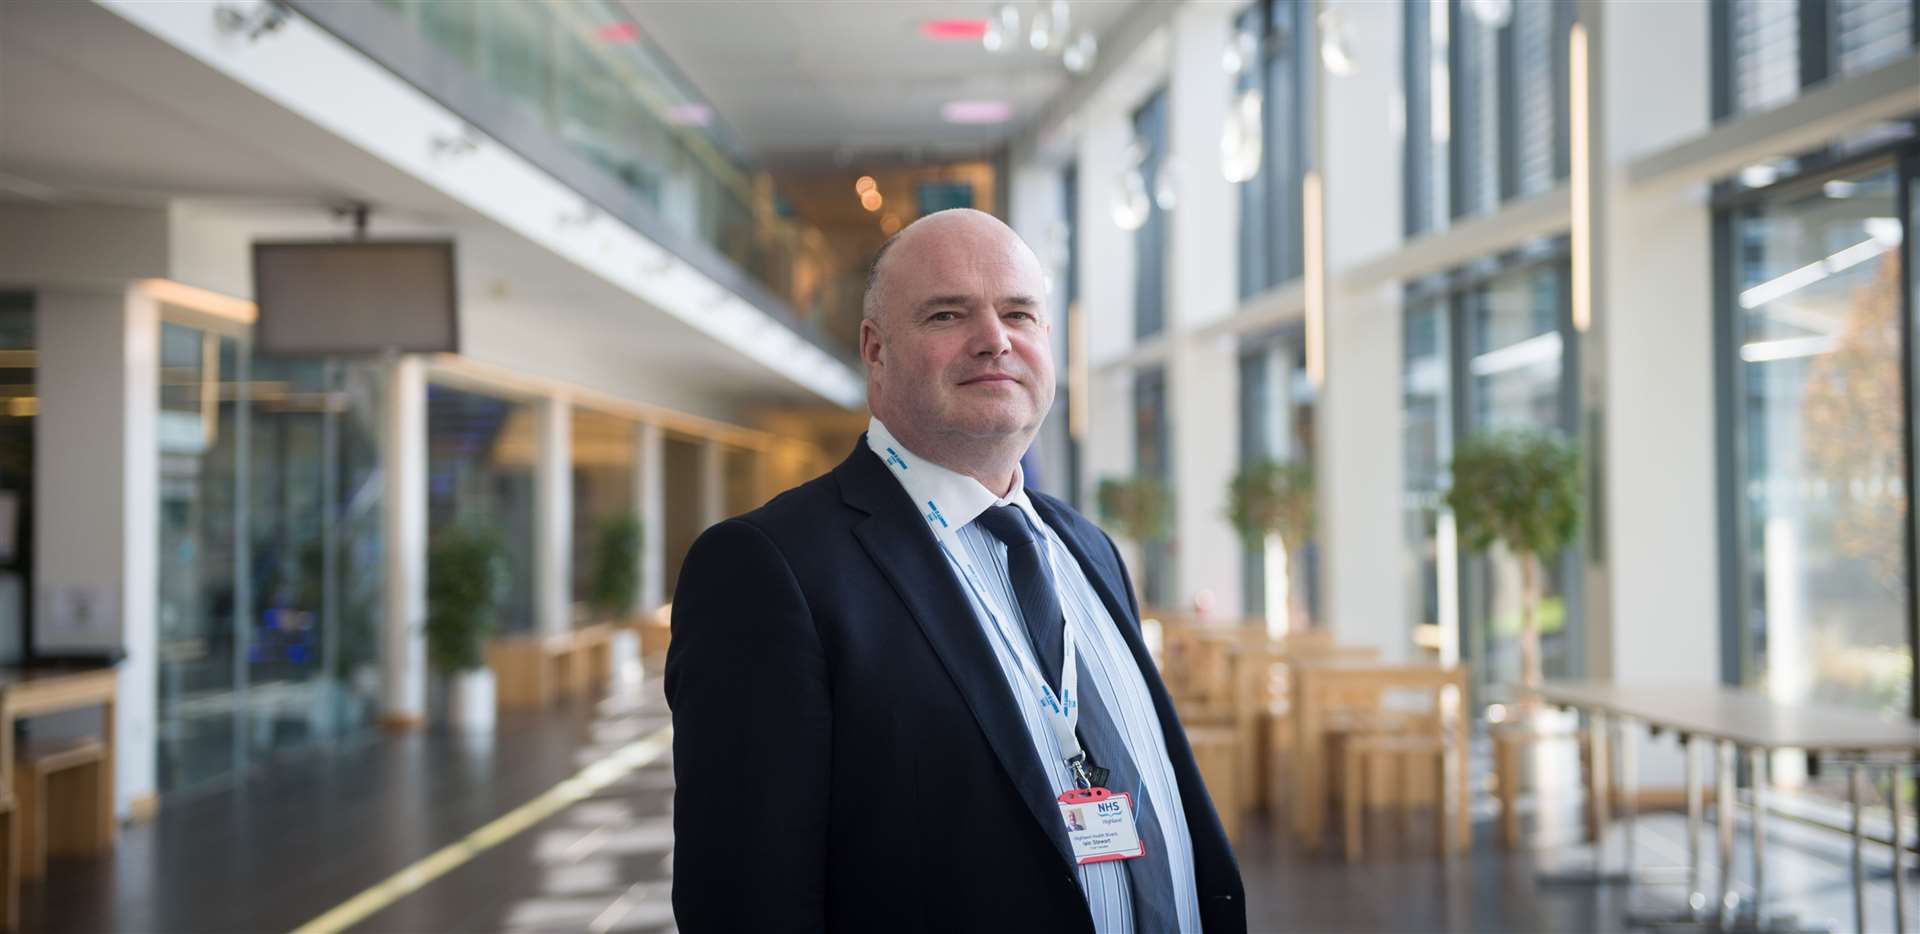 Iain Stewart is moving on from NHS Highland to take an executive role within NHS Orkney. Picture: Callum Mackay